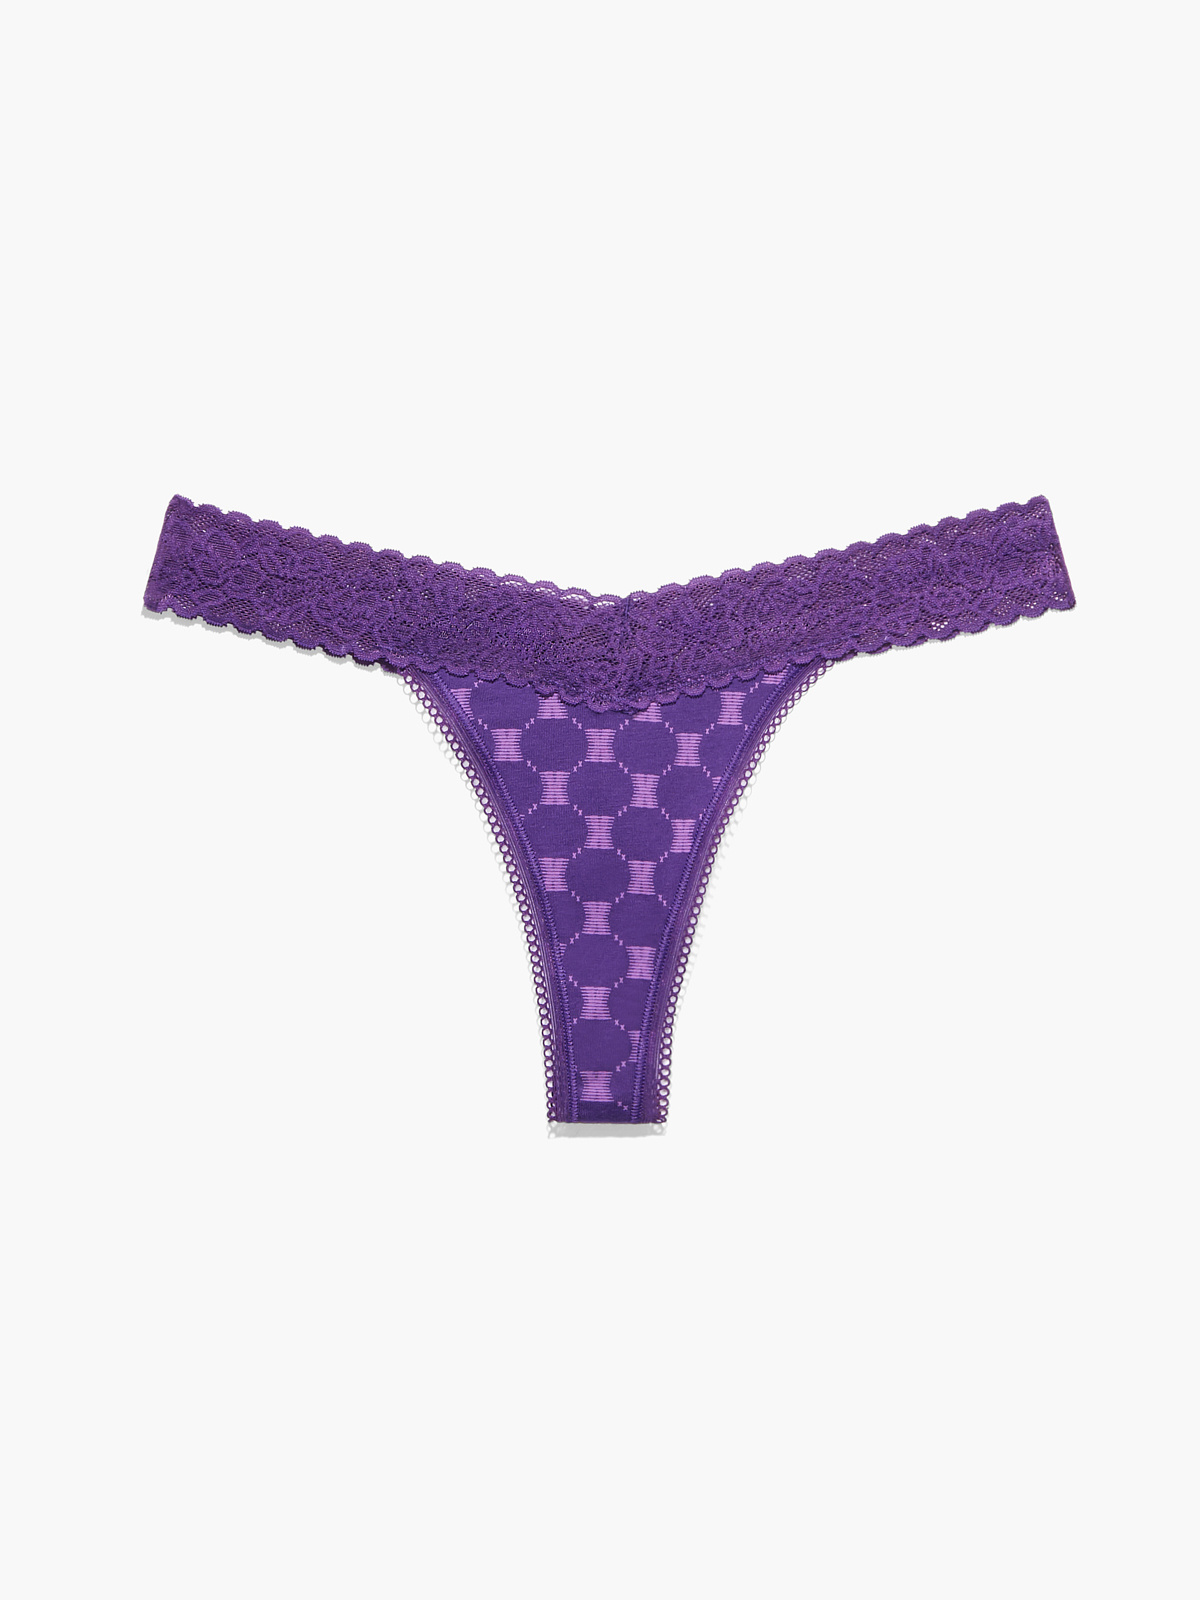 Cotton Essentials Lace-Trim Thong Panty in Purple